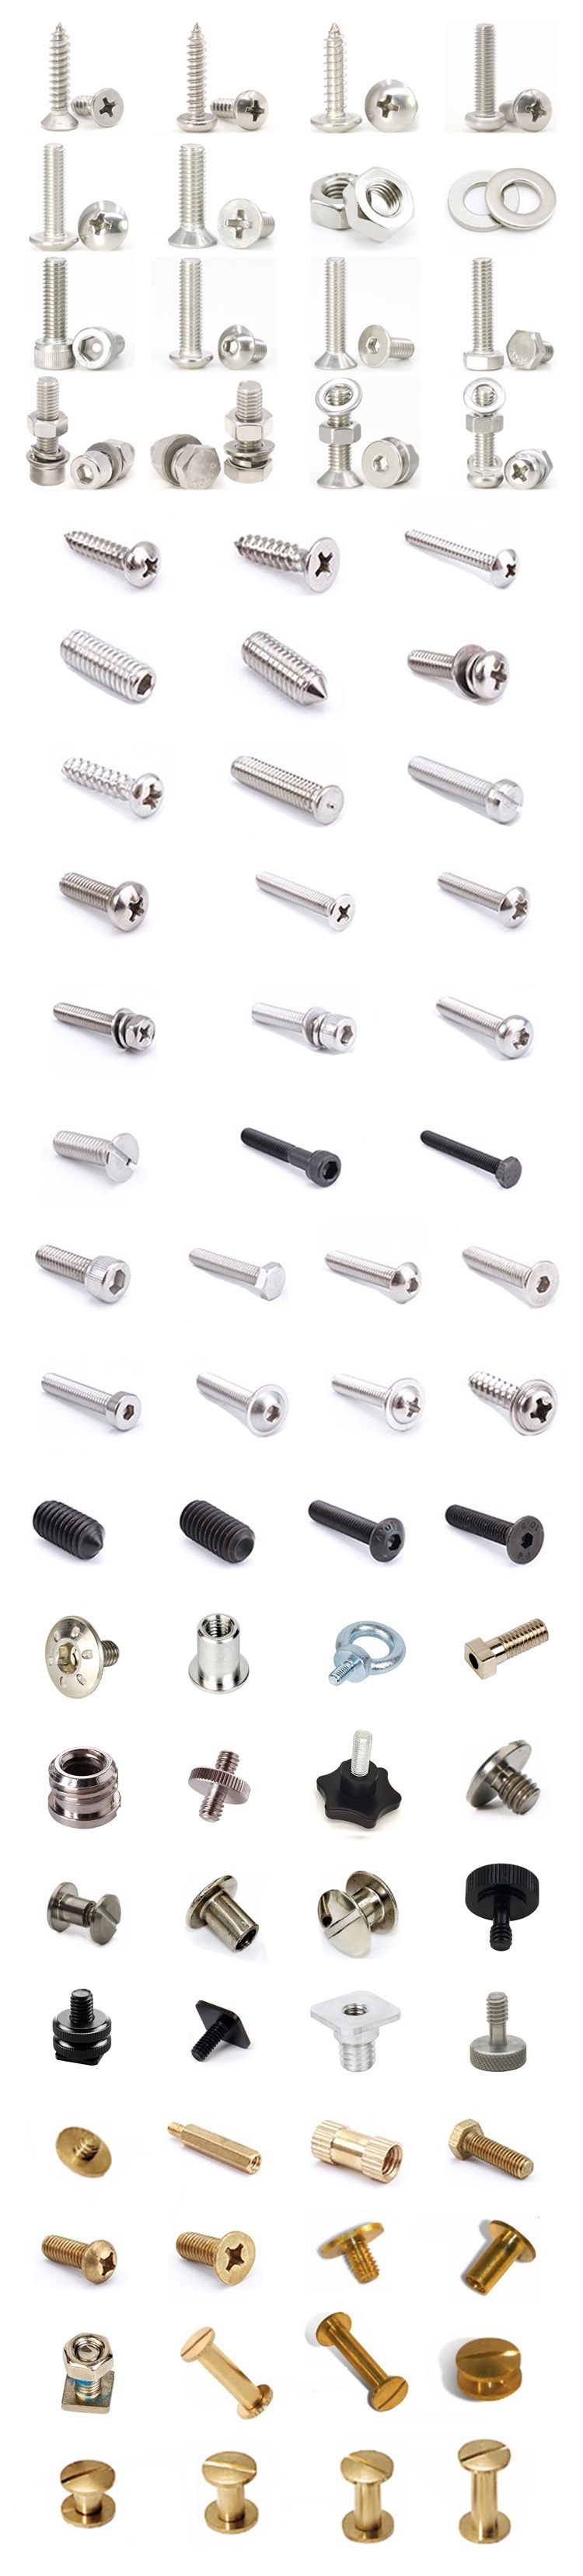 Stainless Steel Metric U Bolt with Plates U-Bolt Clamp